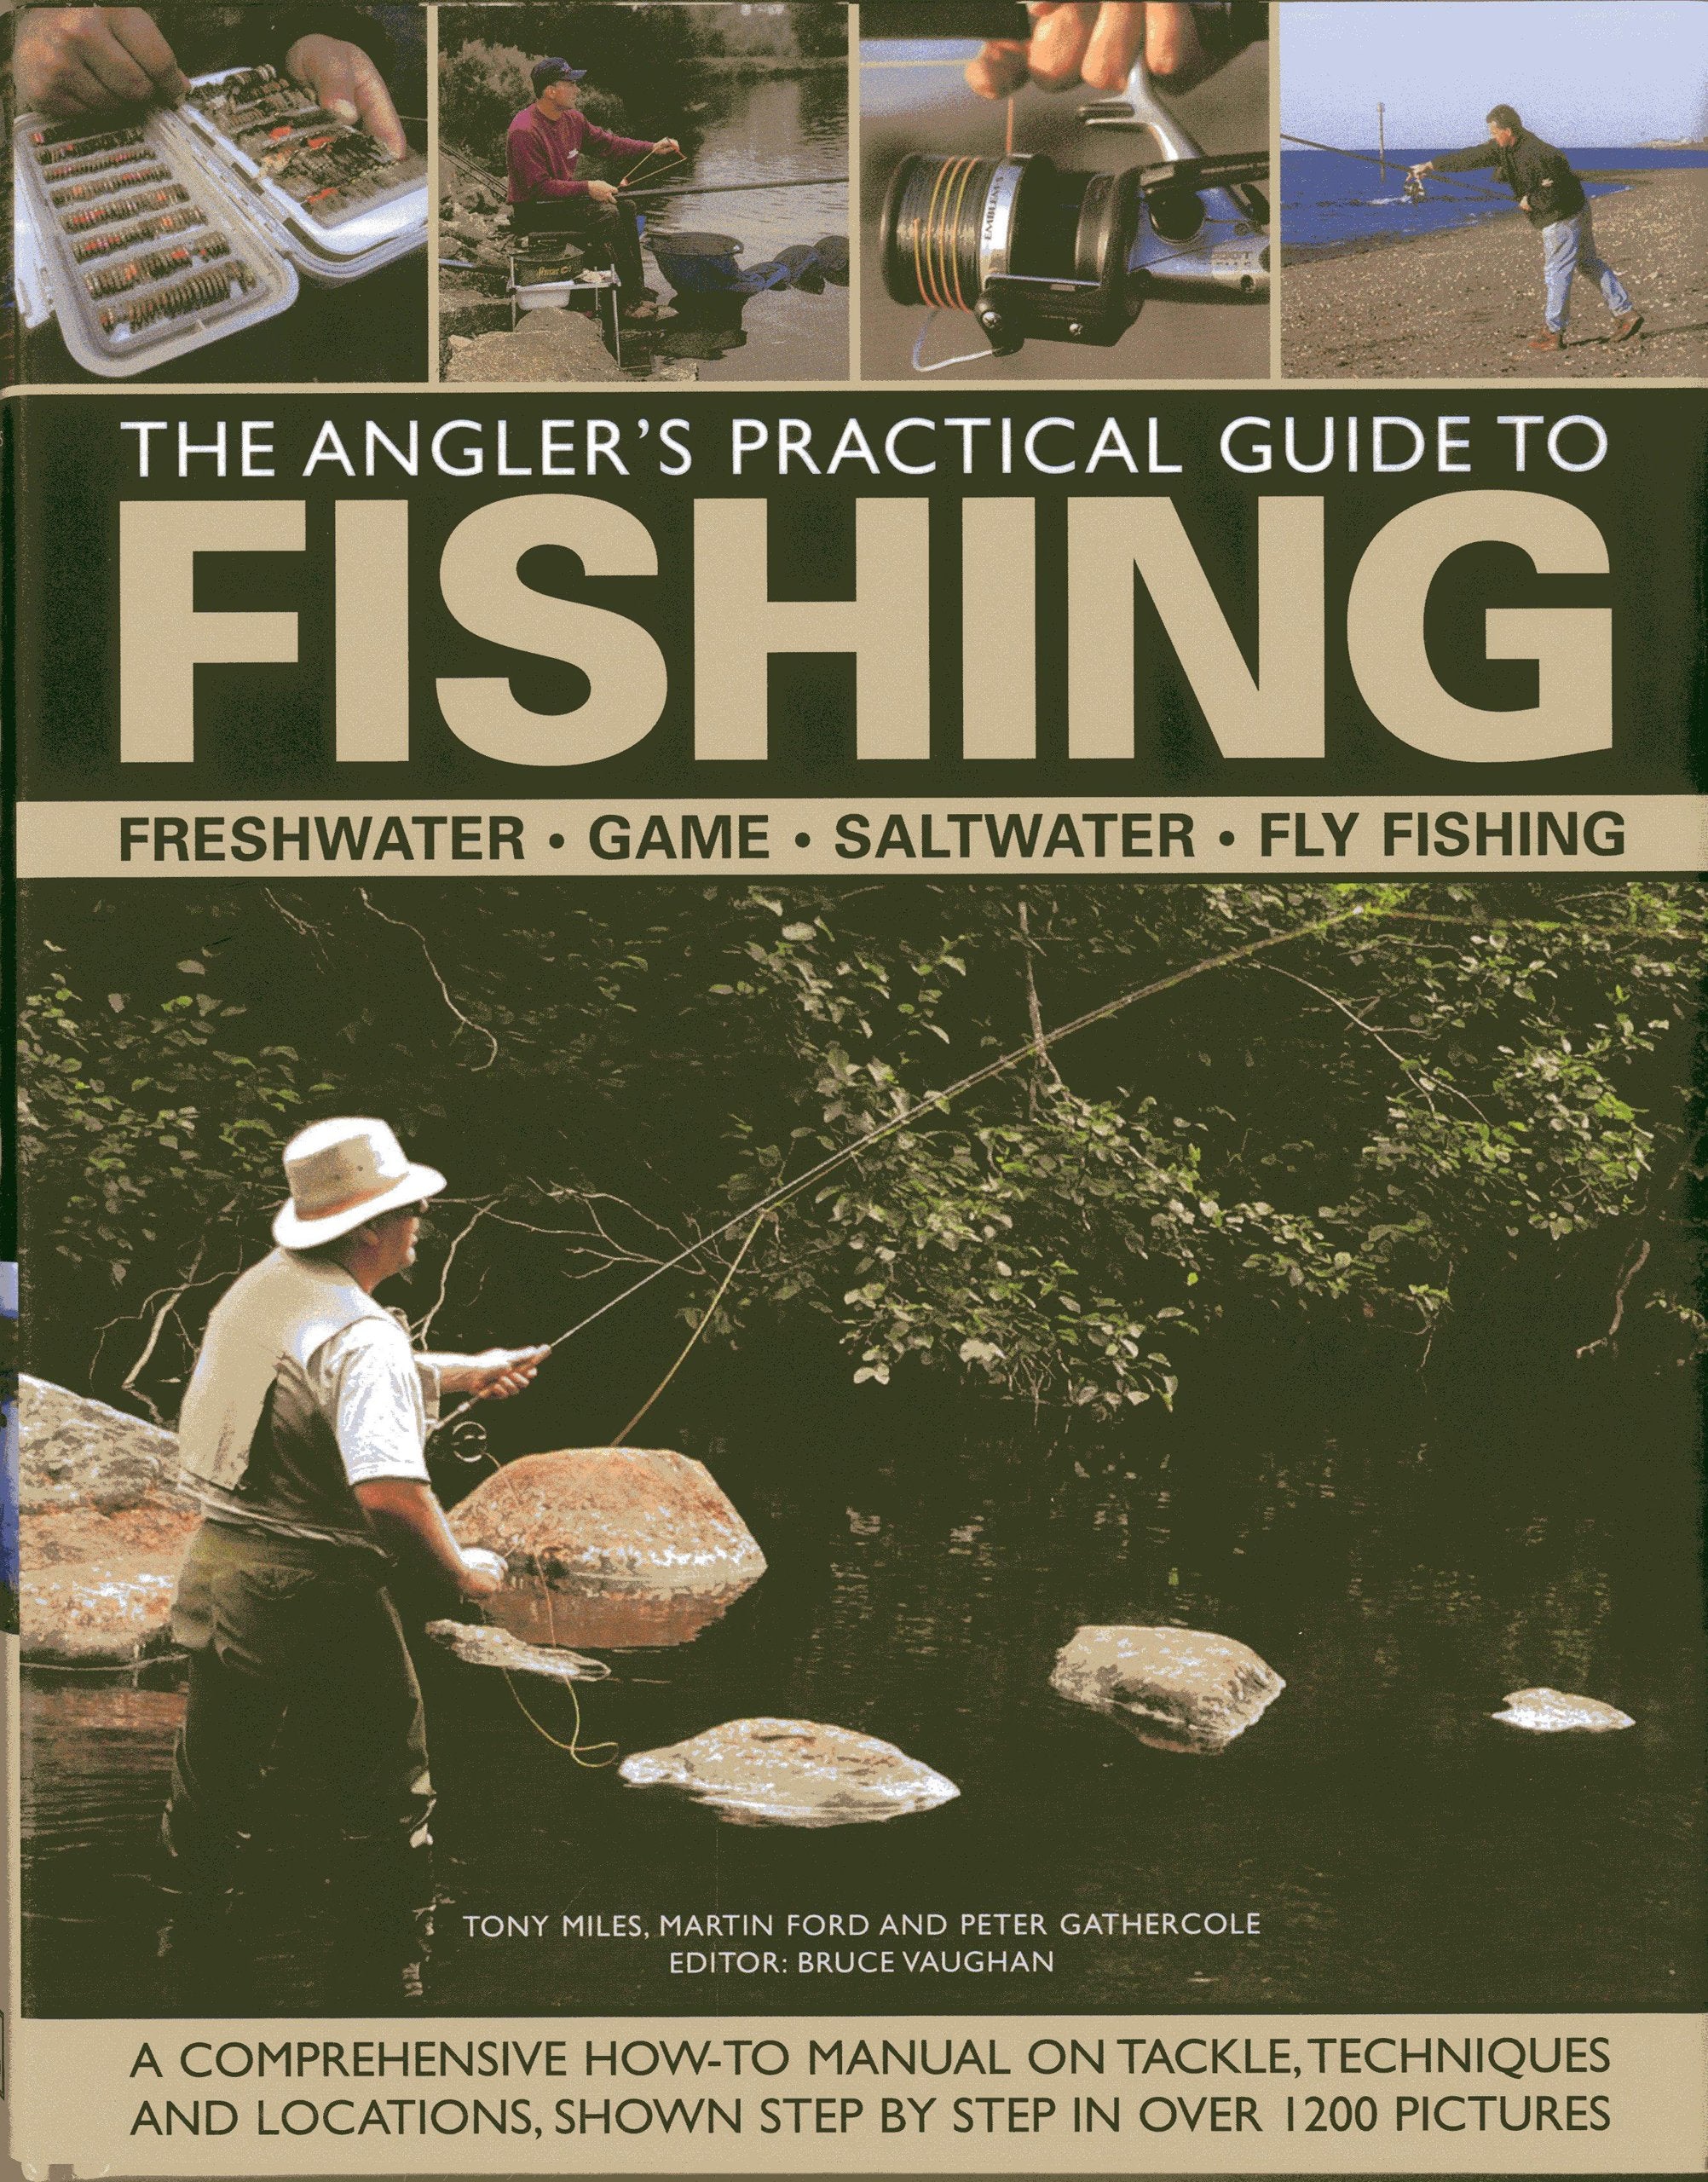 The Angler's Practical Guide to Fishing: A comprehensive how-to manual on tackle, techniques and locations